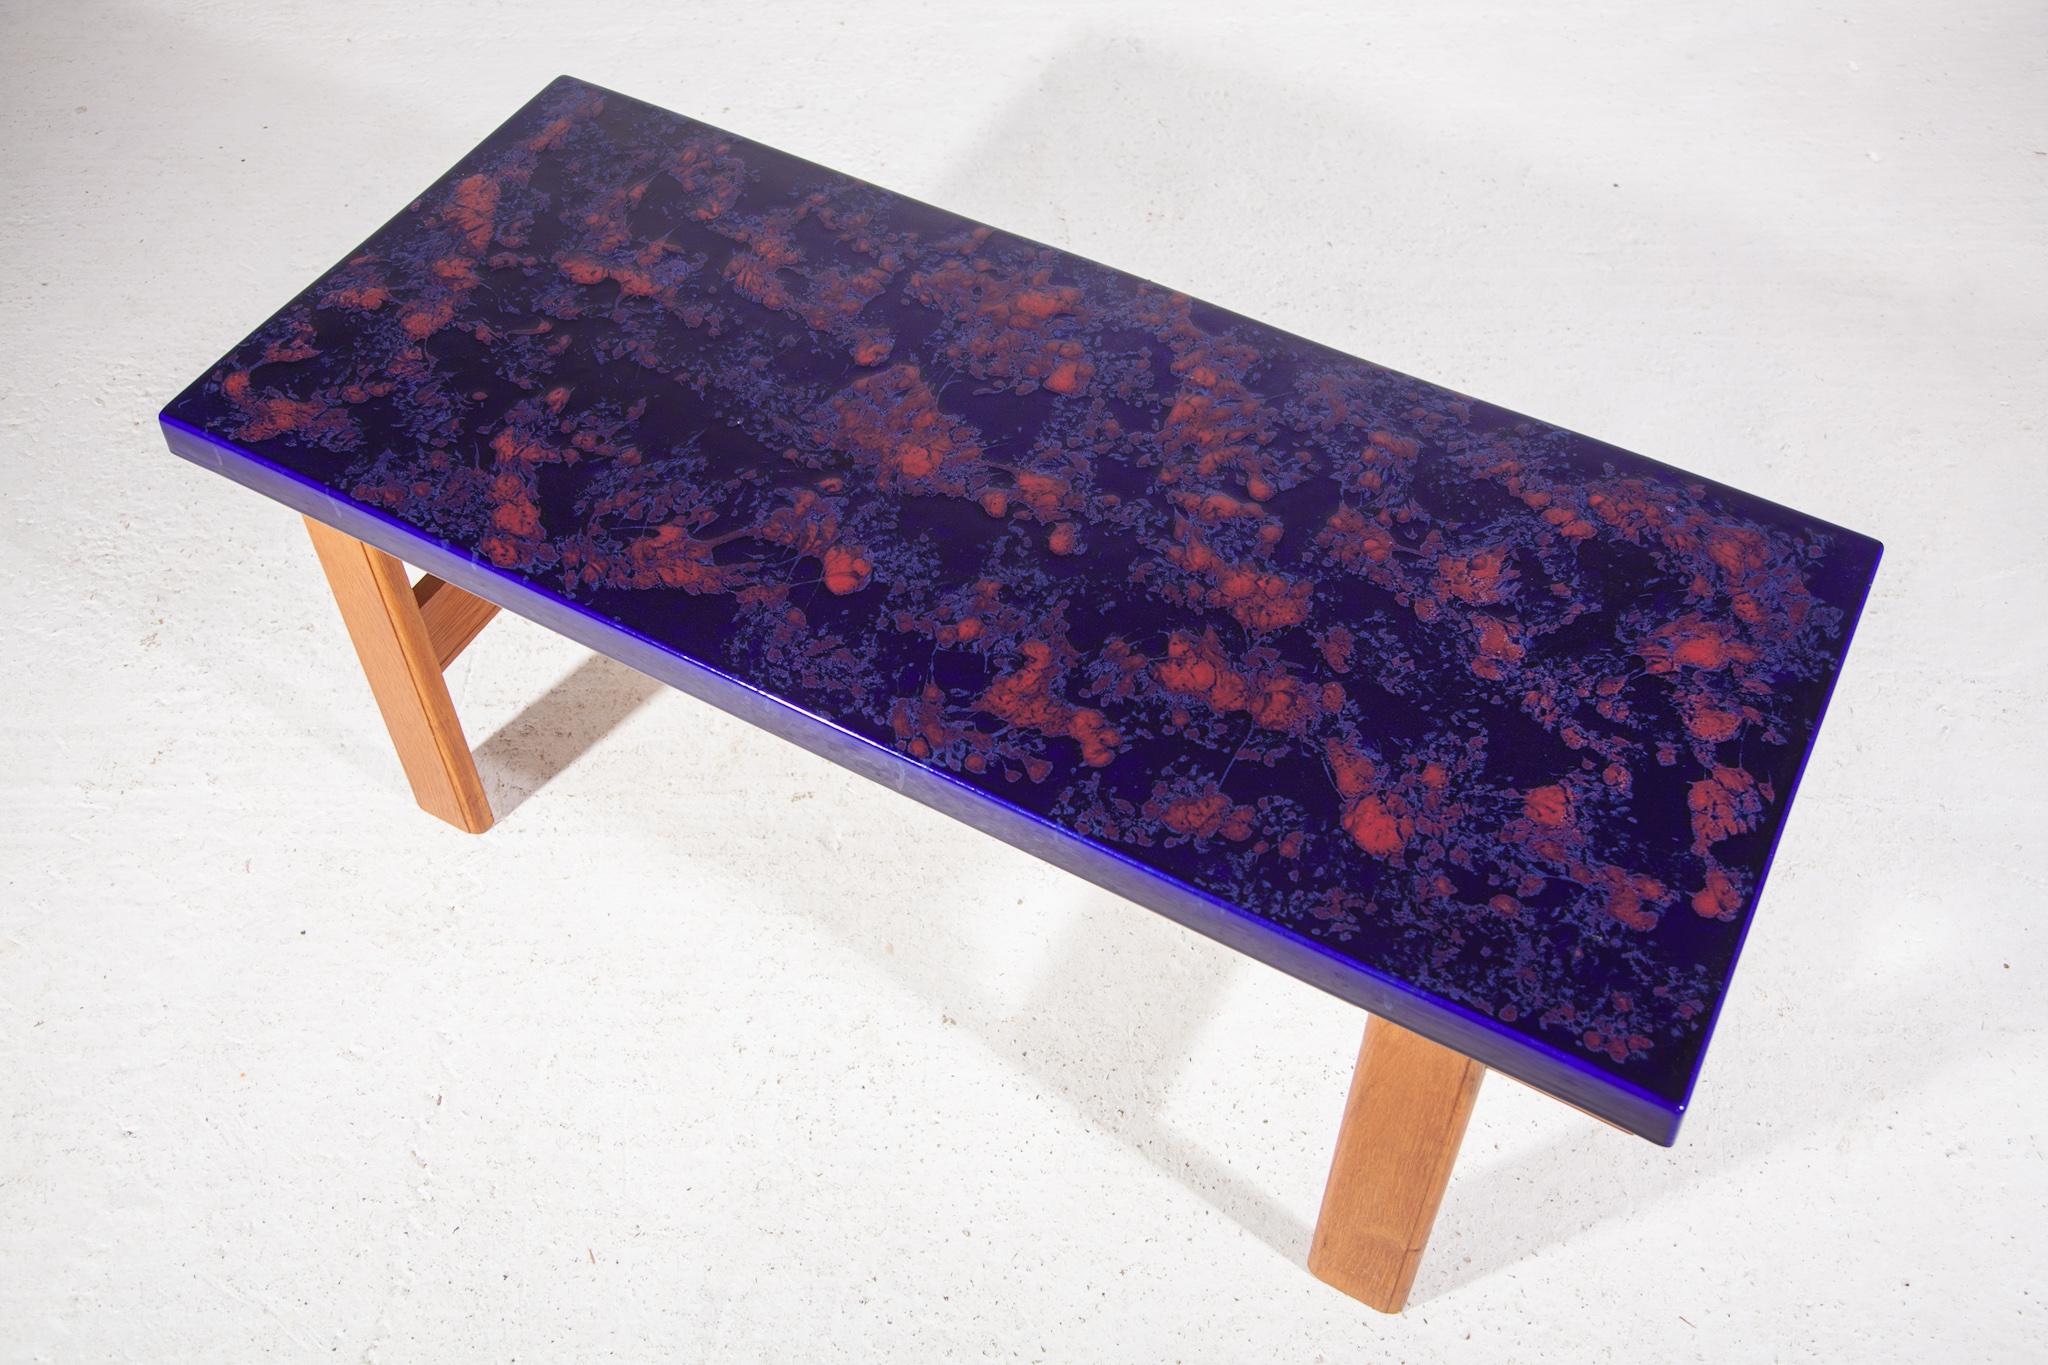 Large Rectangular Top Ceramic Blue and Orange Tile Coffee Table, 1970s In Good Condition For Sale In Antwerp, BE